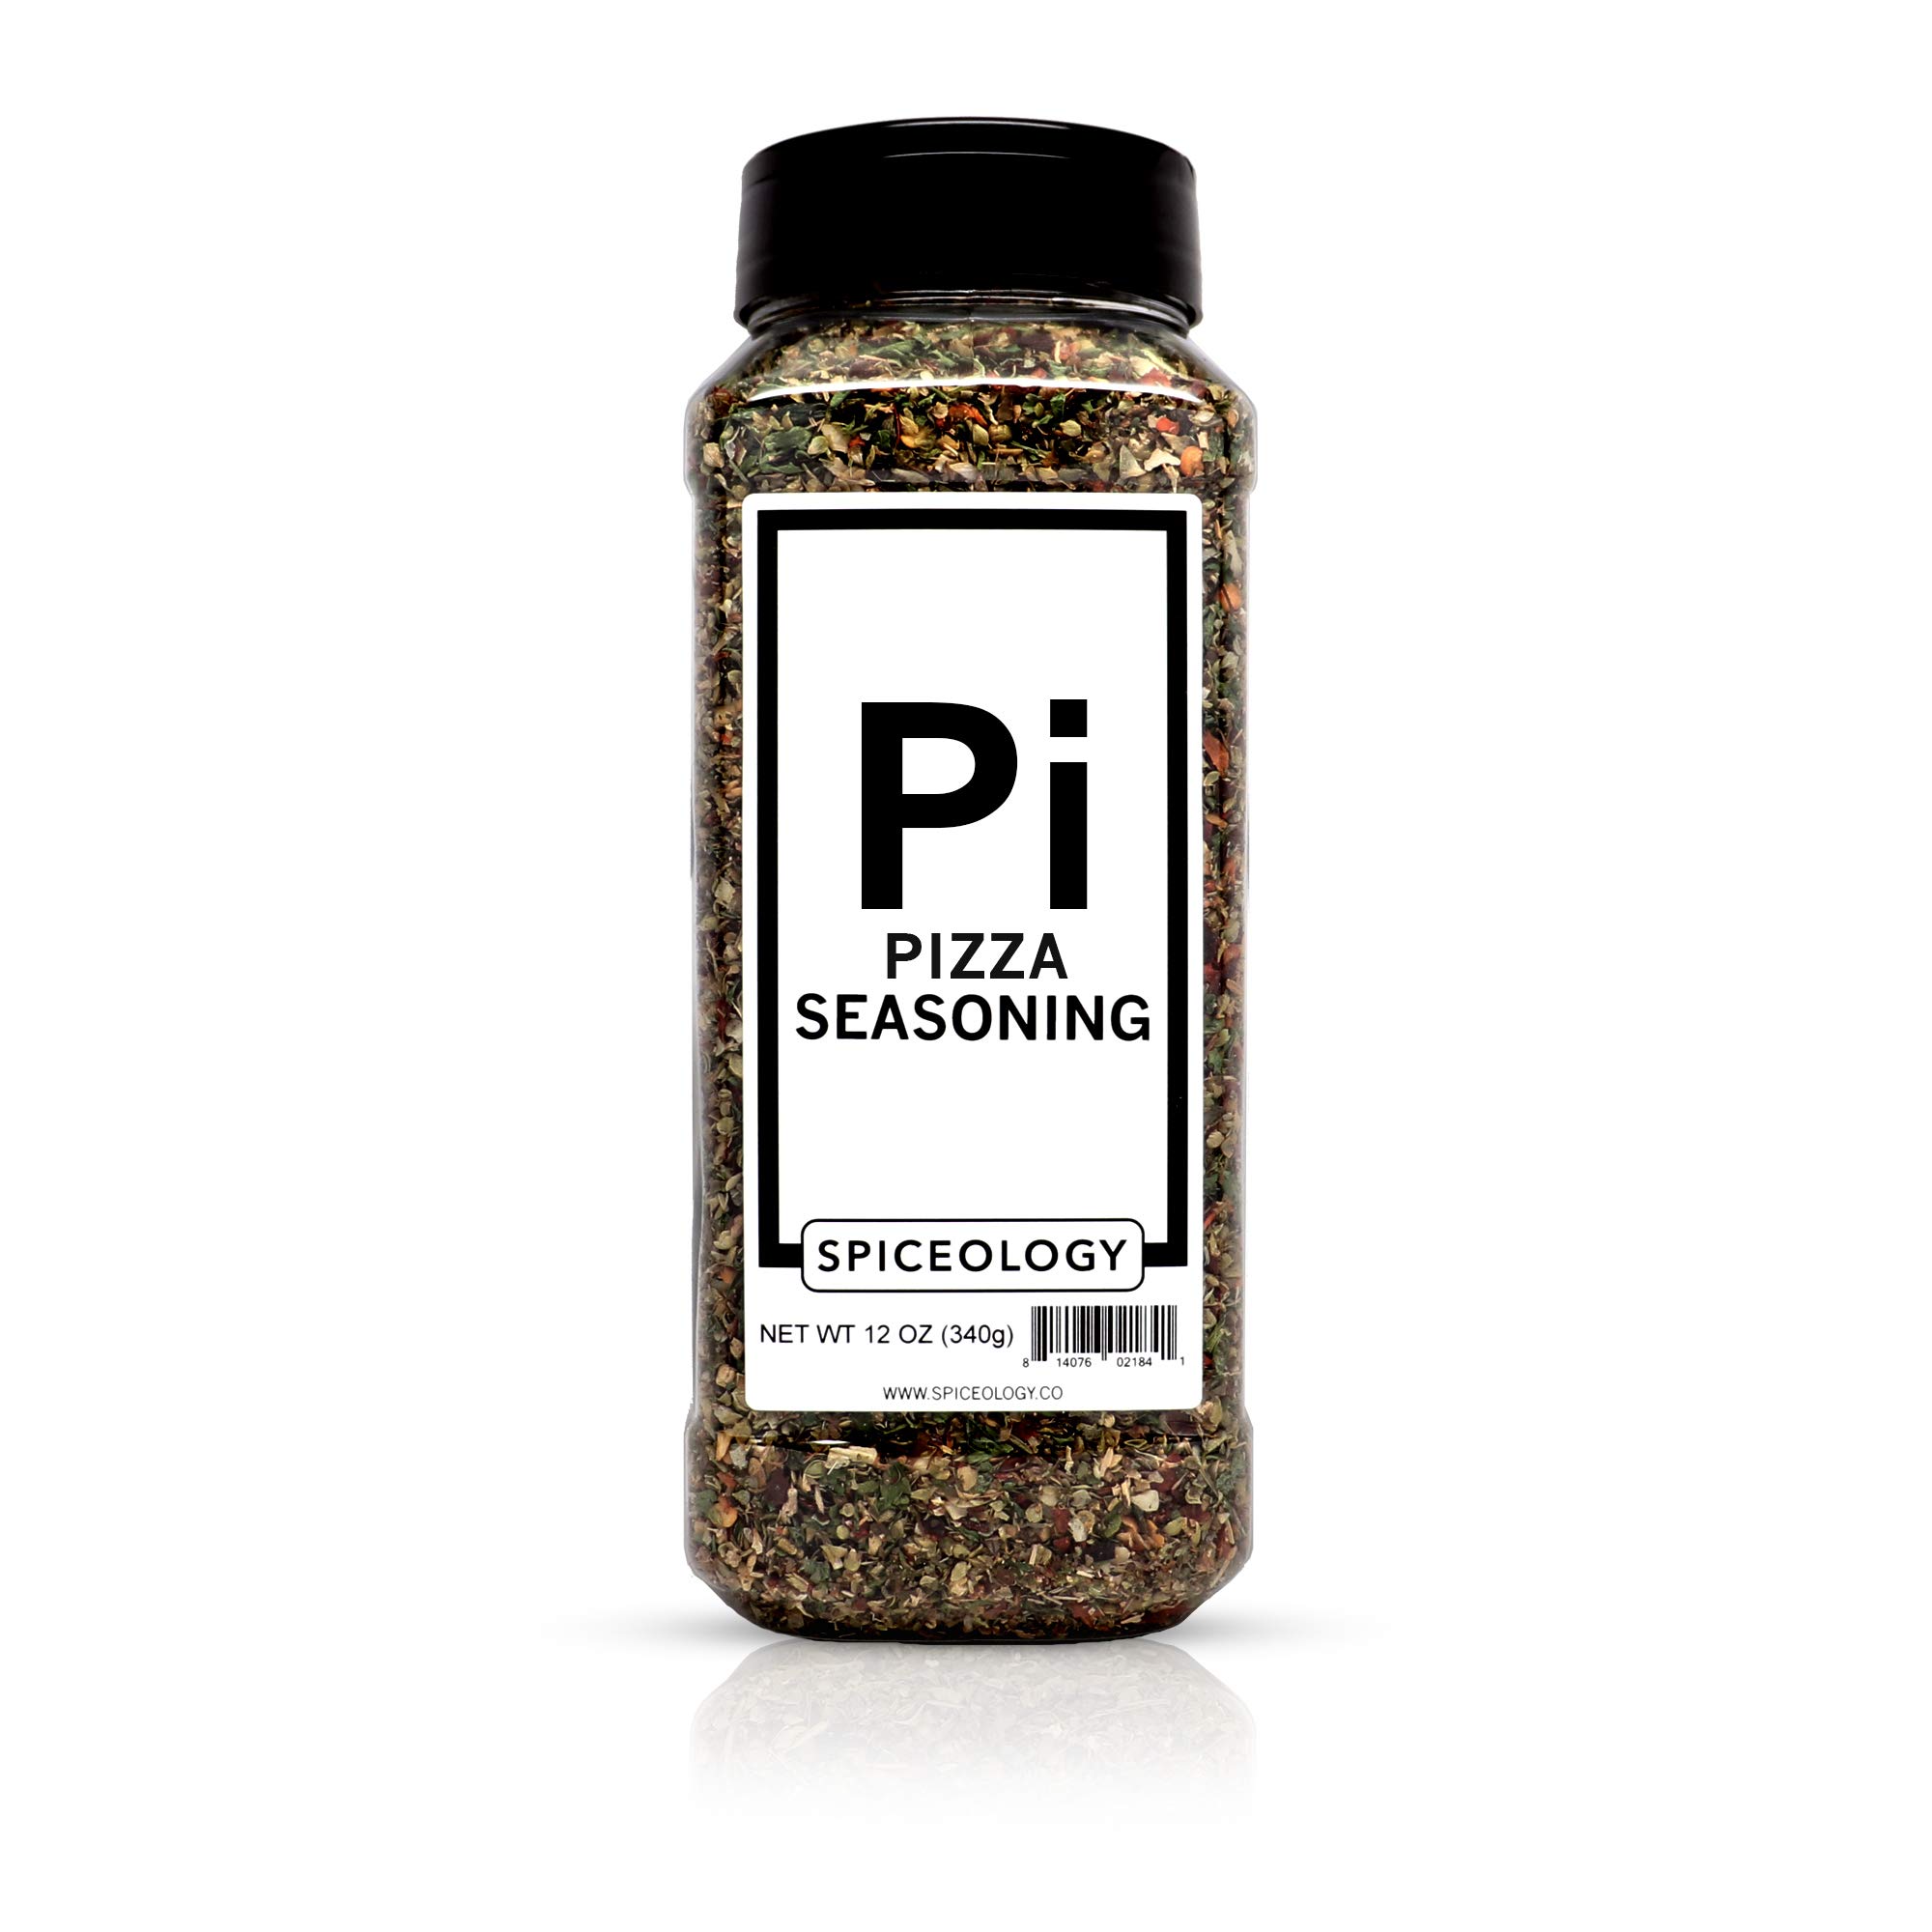 Pizza Seasoning - Spiceology Herbaceous All-Purpose Italian Herb Blend - 12 ounces